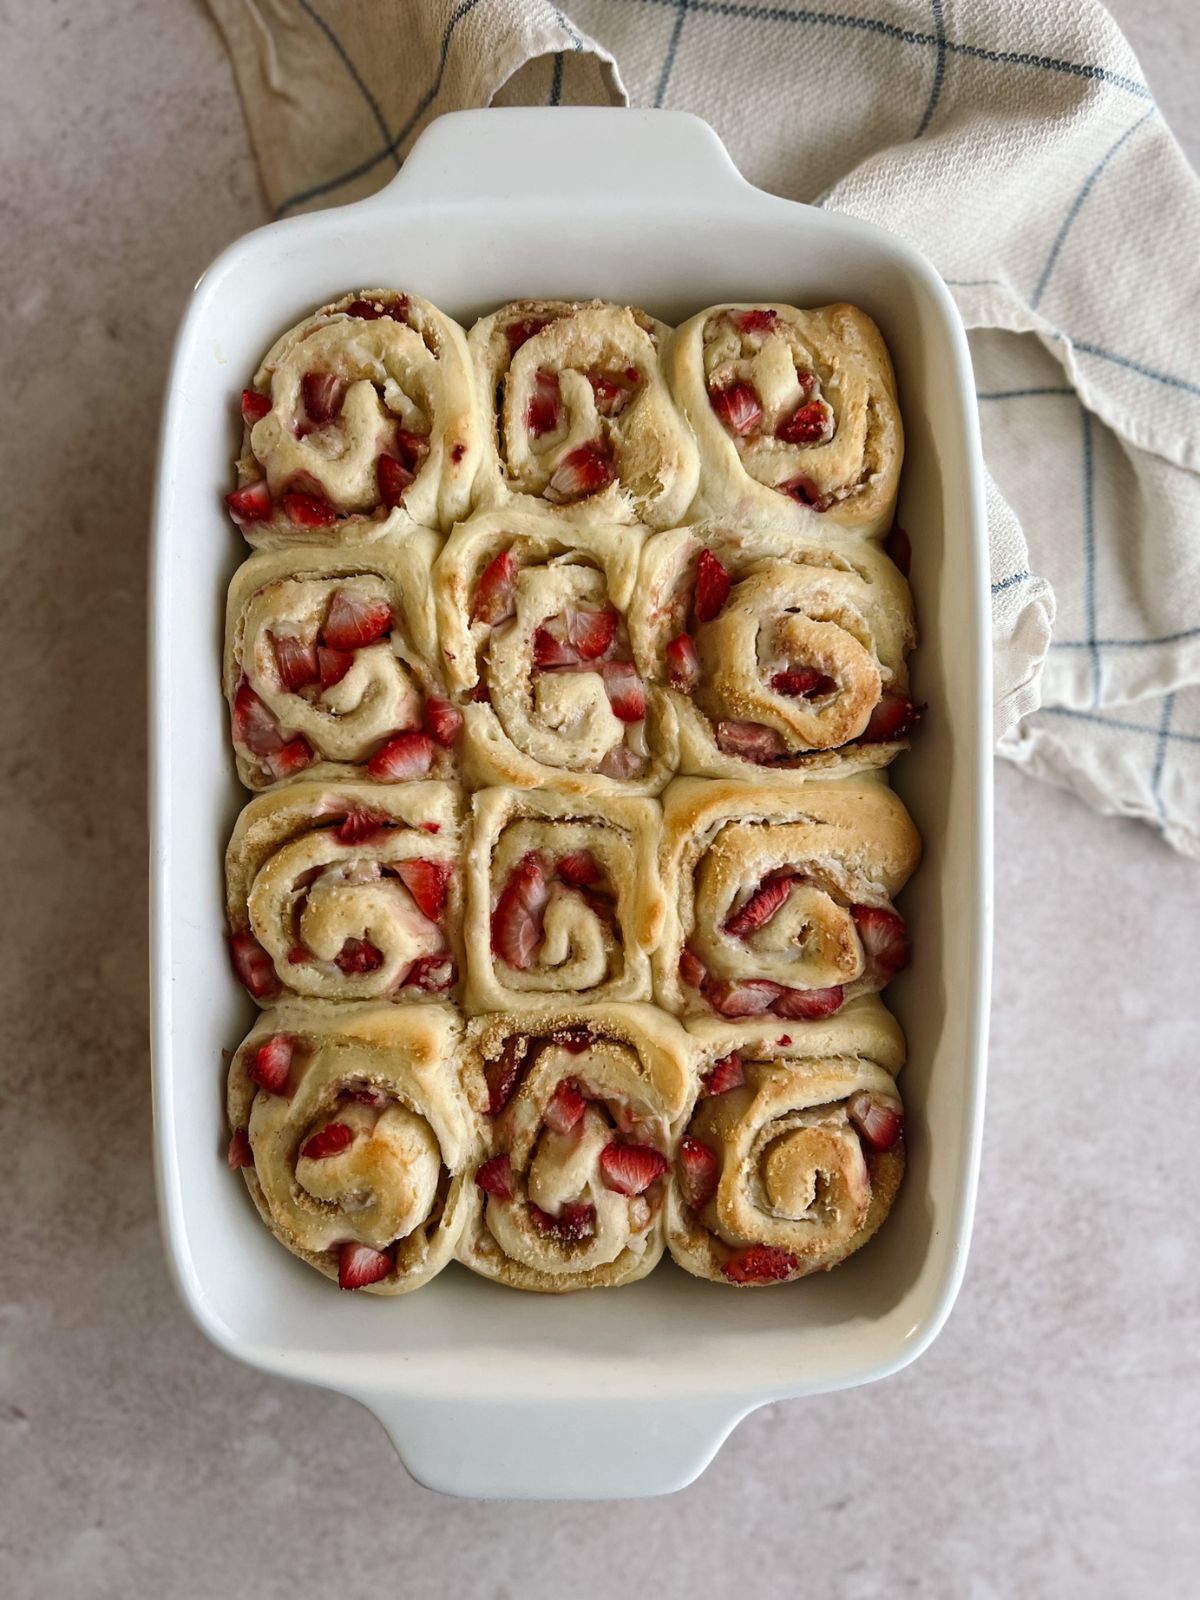 Baked and unfrosted strawberry cheesecake cinnamon rolls in the baking pan.